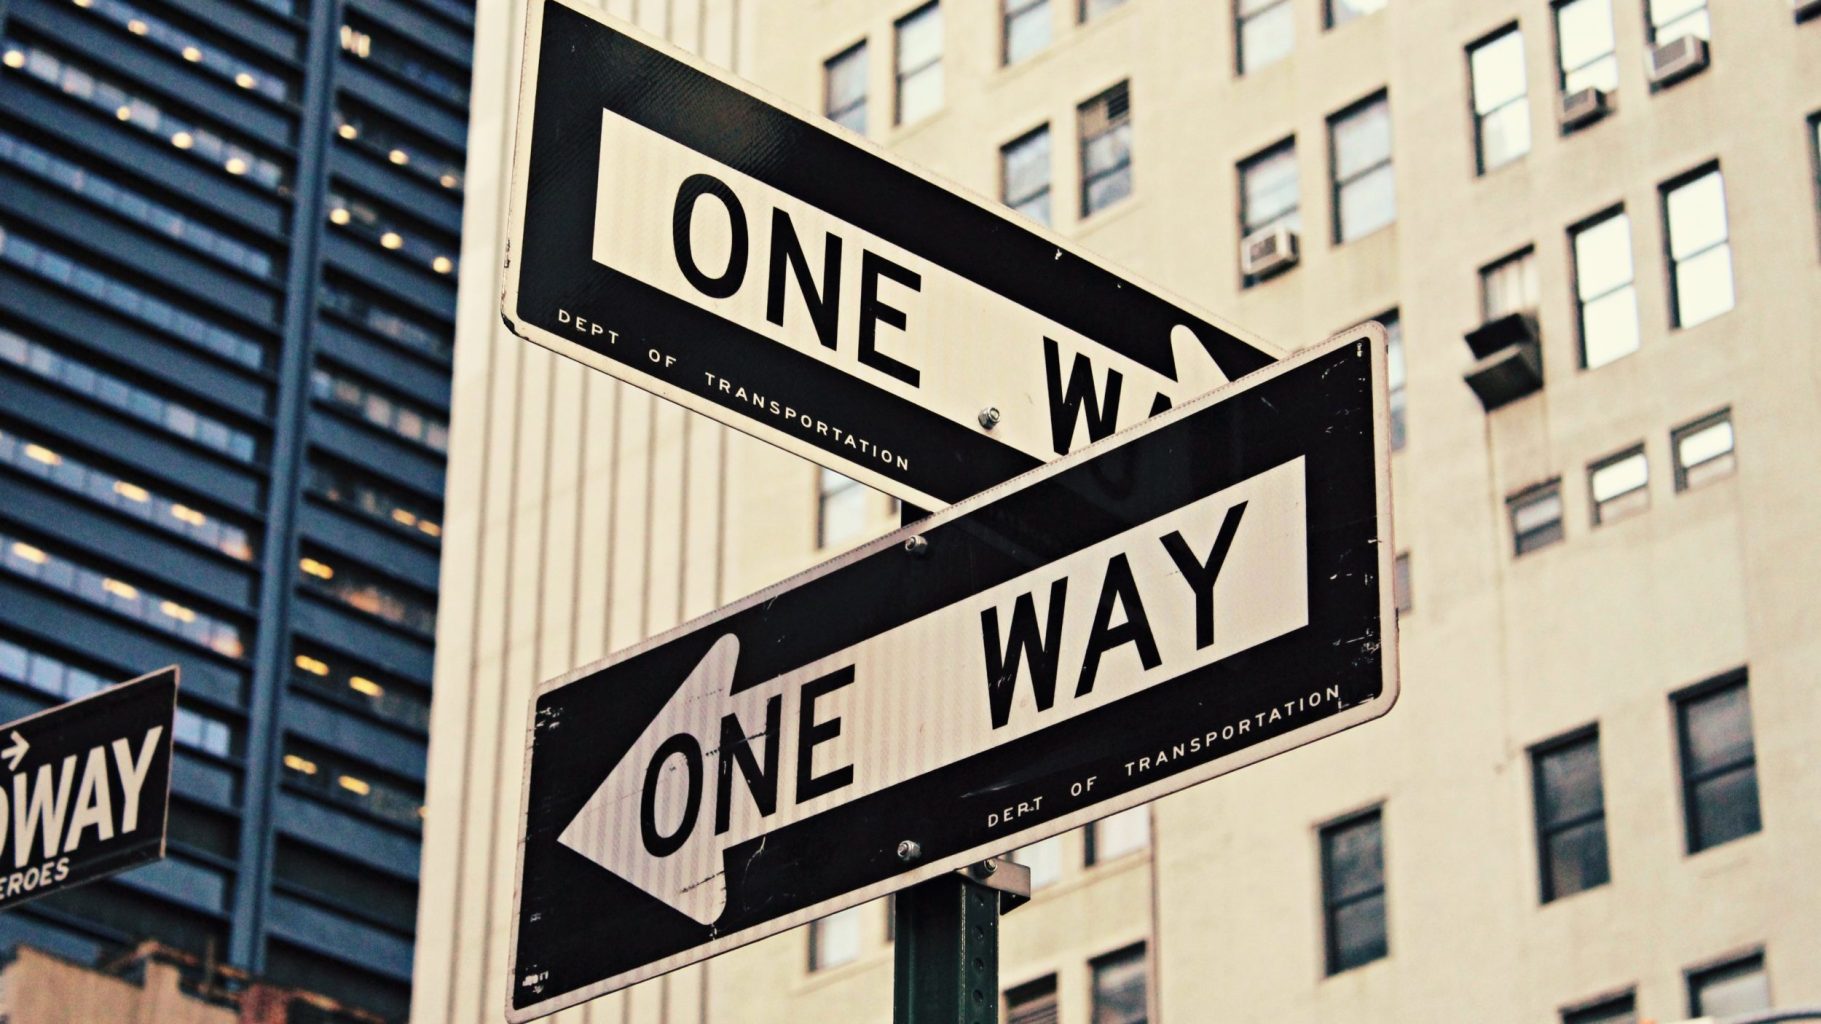 Intersection "one way" road signs.